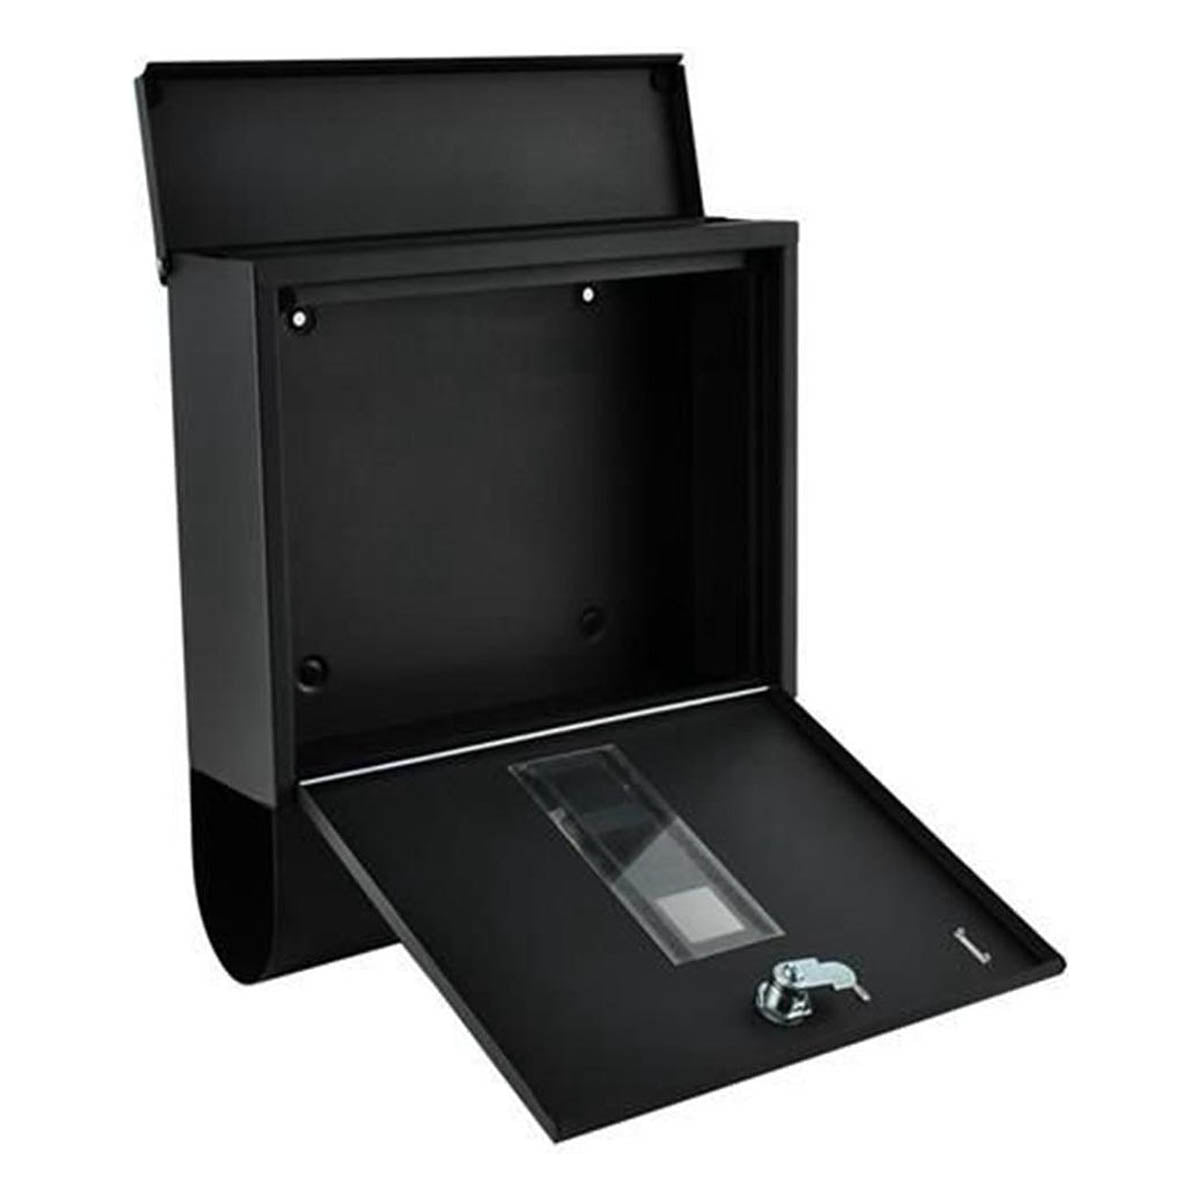 <tc>Ariko</tc> wall letterbox - stainless steel - anthracite black - with newspaper roll - matte black - up to 8 newspapers